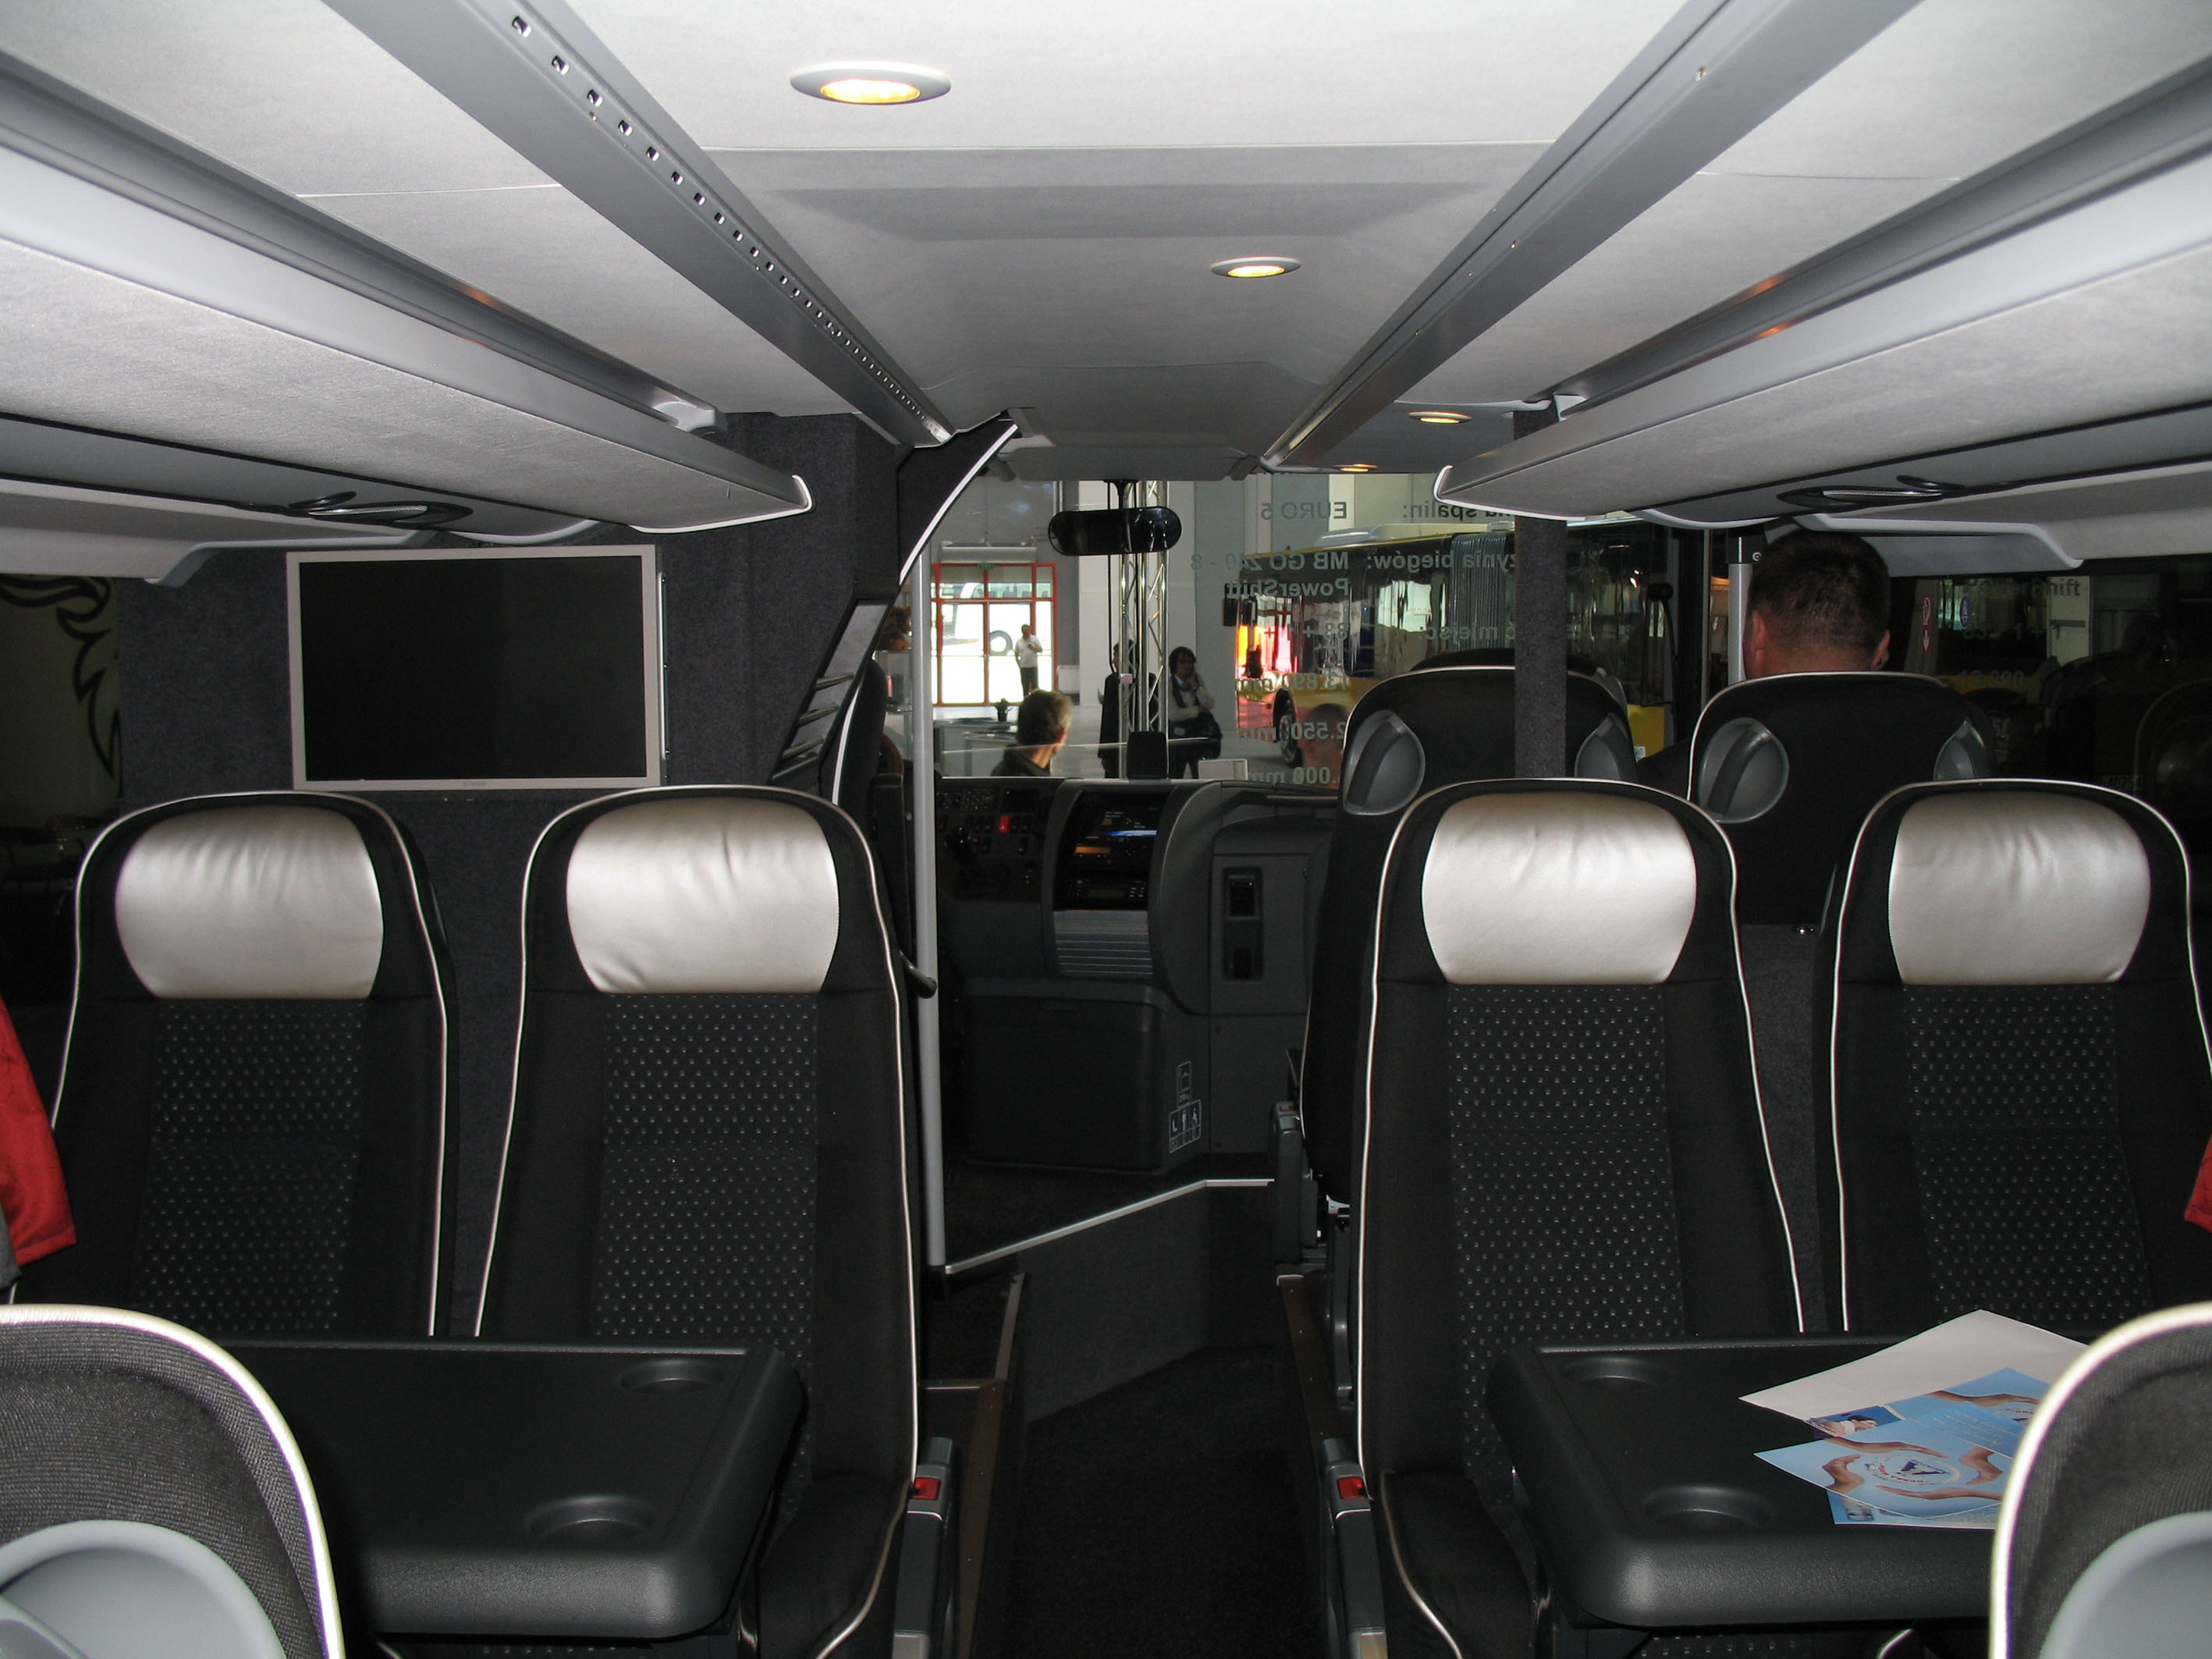 File:Setra S 431 DT - interior front.jpg - Wikimedia Commons